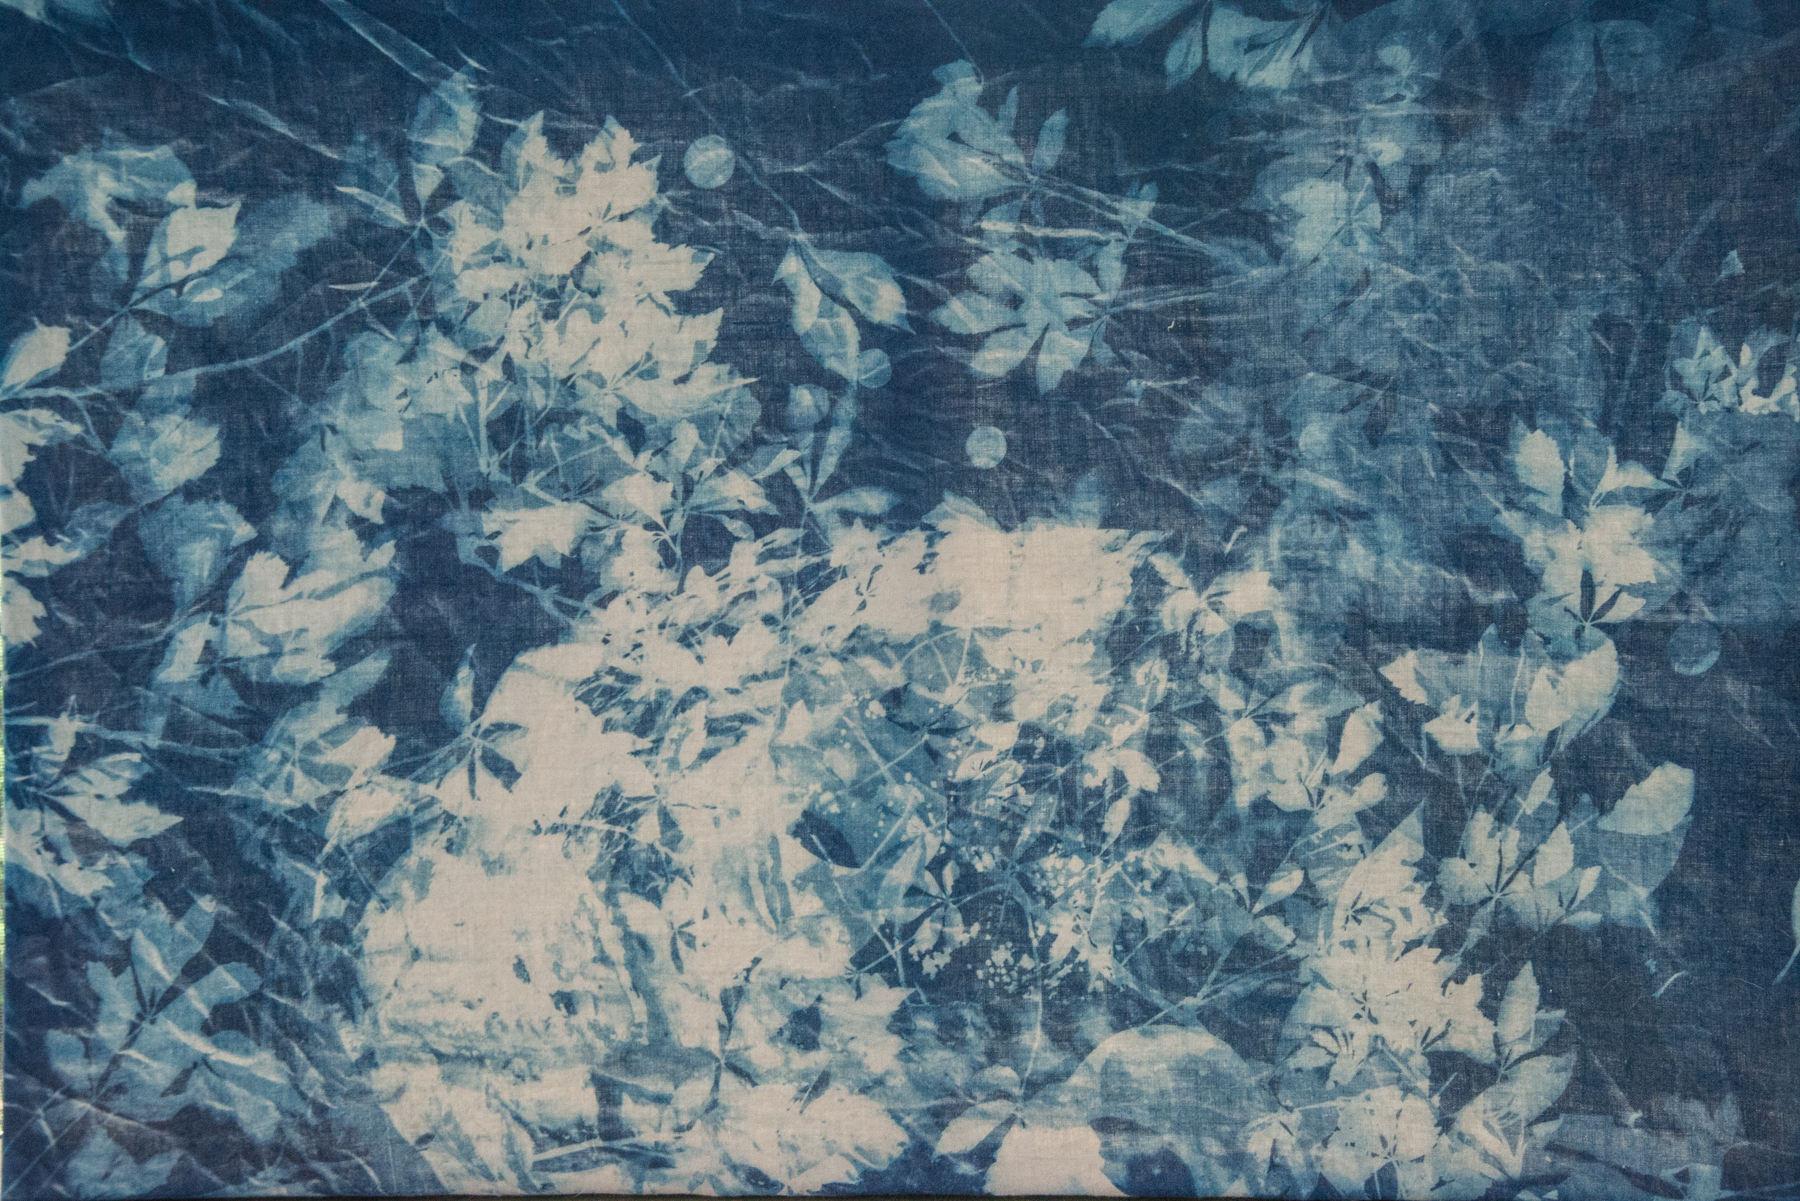  Marie Craig,  Thicket,  cyanotype on linen, stretched over canvas, 24x36 